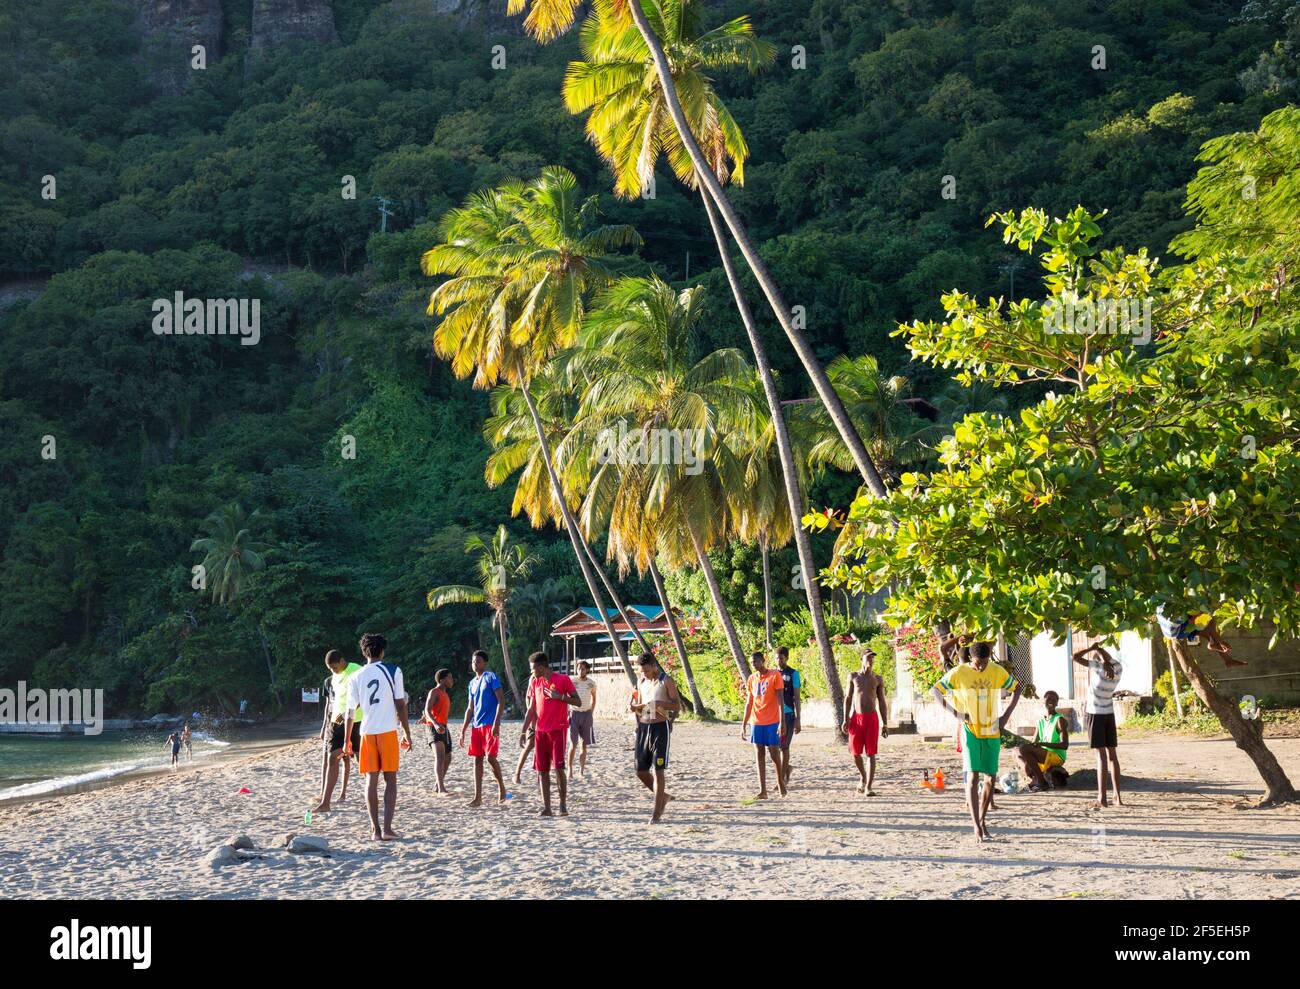 Soufriere, St Lucia. Local boys preparing for a football training session on the beach. Stock Photo